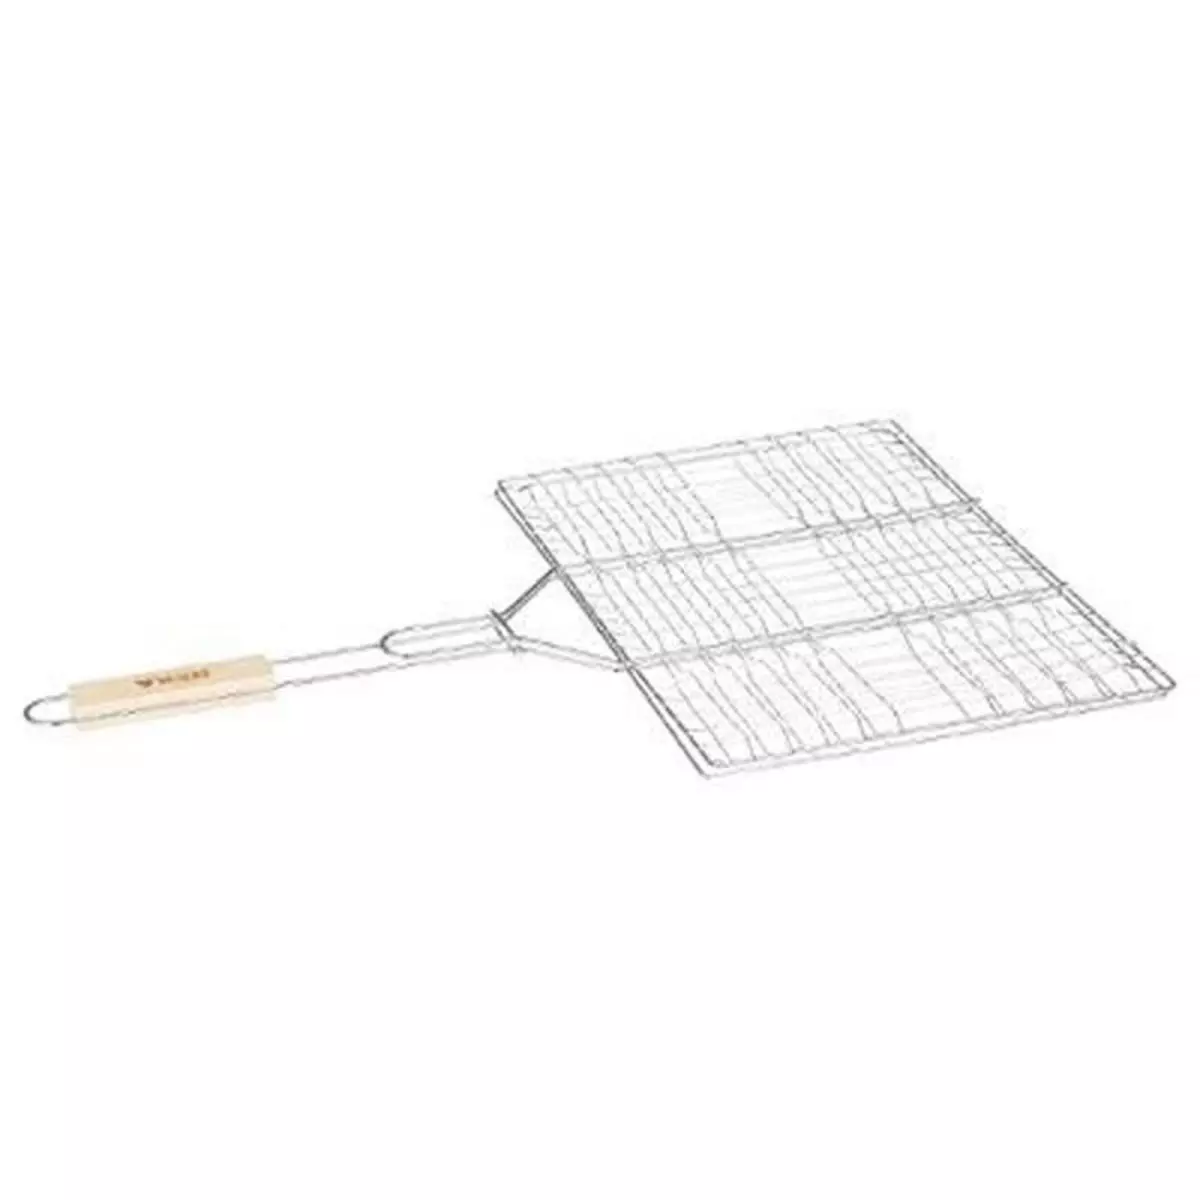  Double Grille Barbecue  Summer  30x40cm Chrome